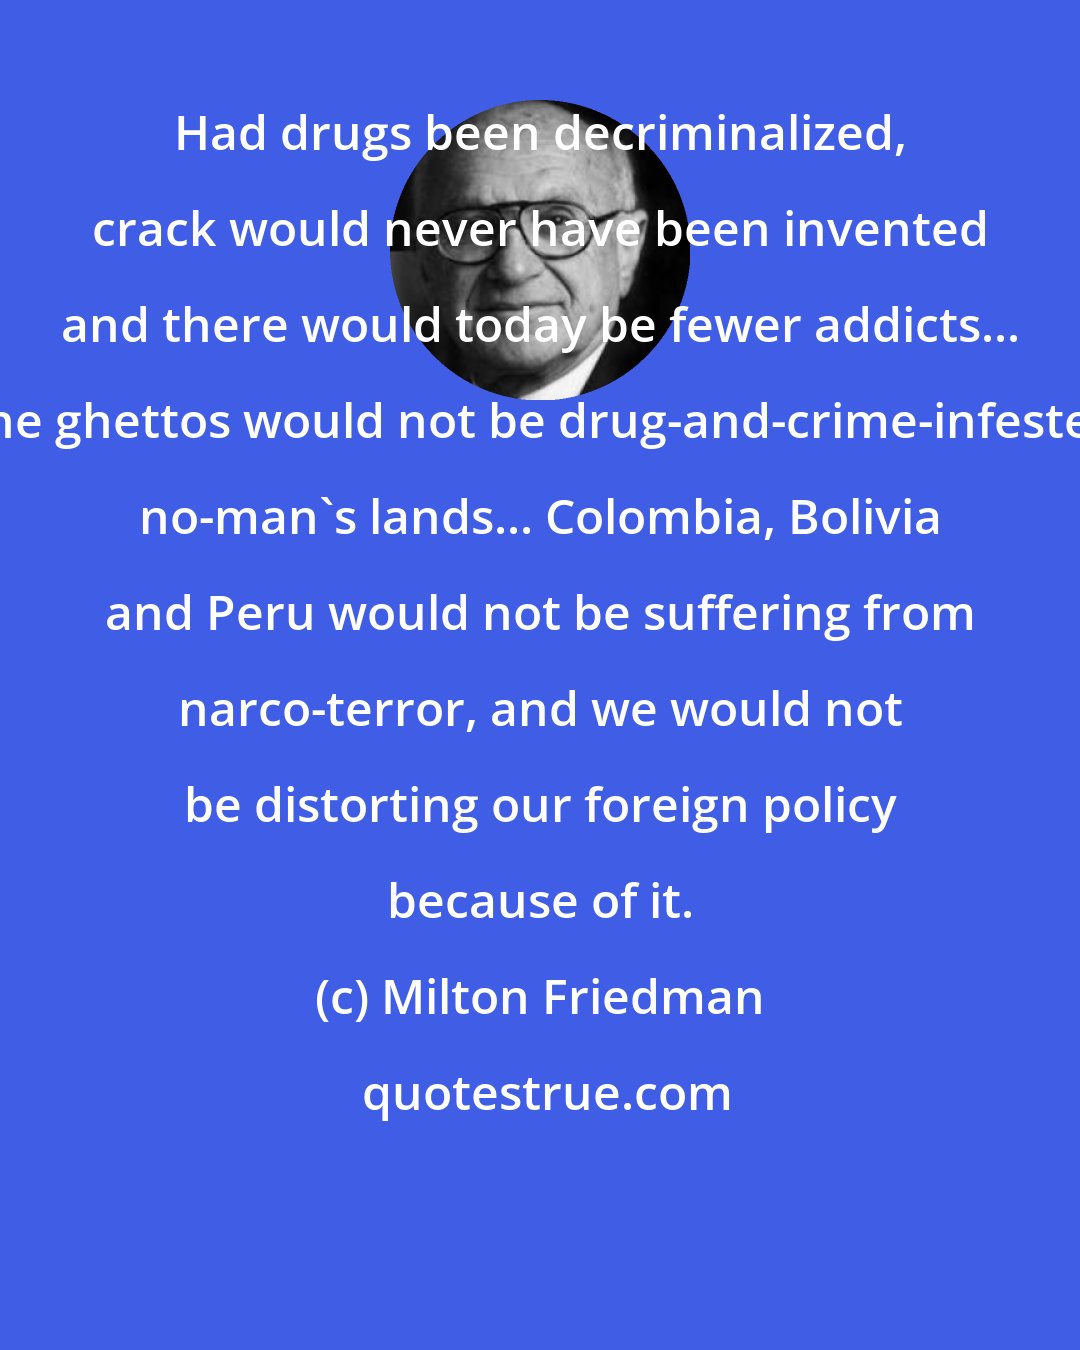 Milton Friedman: Had drugs been decriminalized, crack would never have been invented and there would today be fewer addicts... The ghettos would not be drug-and-crime-infested no-man's lands... Colombia, Bolivia and Peru would not be suffering from narco-terror, and we would not be distorting our foreign policy because of it.